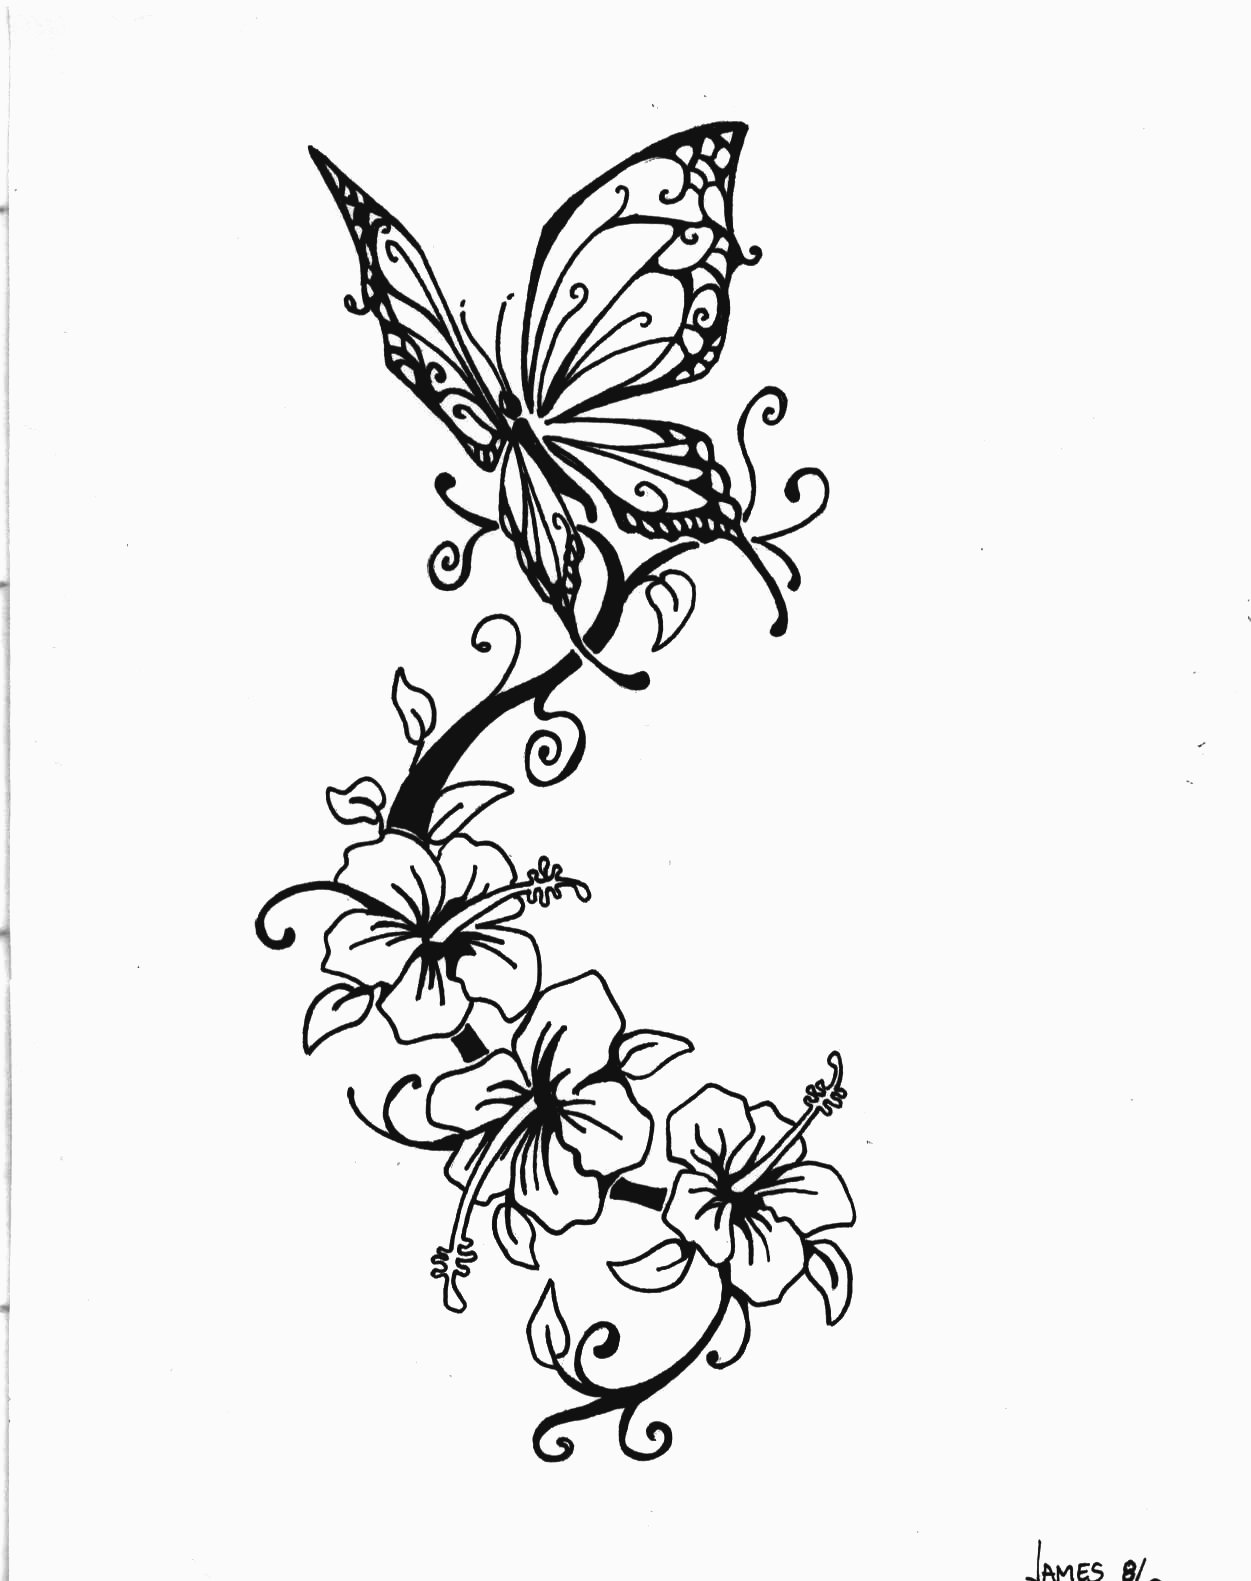 Butterfly tattoo designs have become increasingly popular in Vietnam in 2024 as more people embrace the beauty and symbolism of these delicate creatures. From minimalist designs to intricate masterpieces, butterfly tattoos offer a range of options to suit every preference. Whether you’re looking to express your love of nature or add some elegance to your body art collection, a butterfly tattoo is the perfect choice. Check out the latest designs and get inspired by the creativity and artistry of talented Vietnamese tattoo artists.